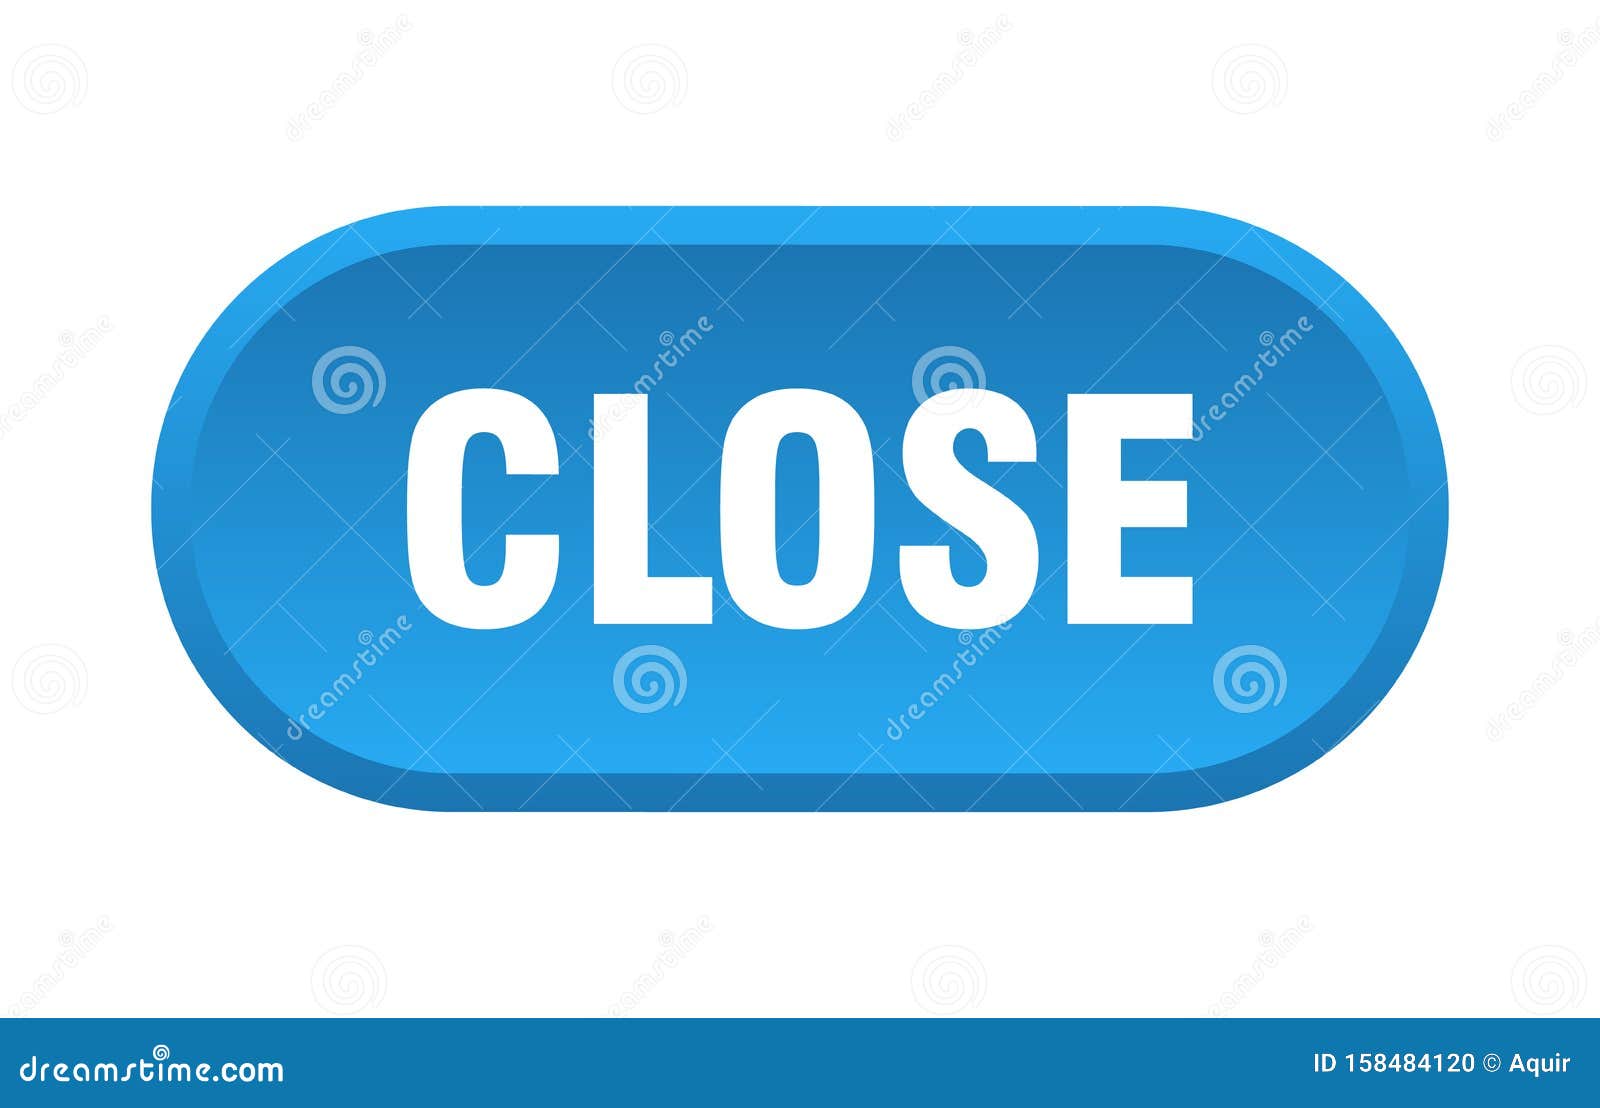 https://thumbs.dreamstime.com/z/close-button-rounded-isolated-sign-158484120.jpg